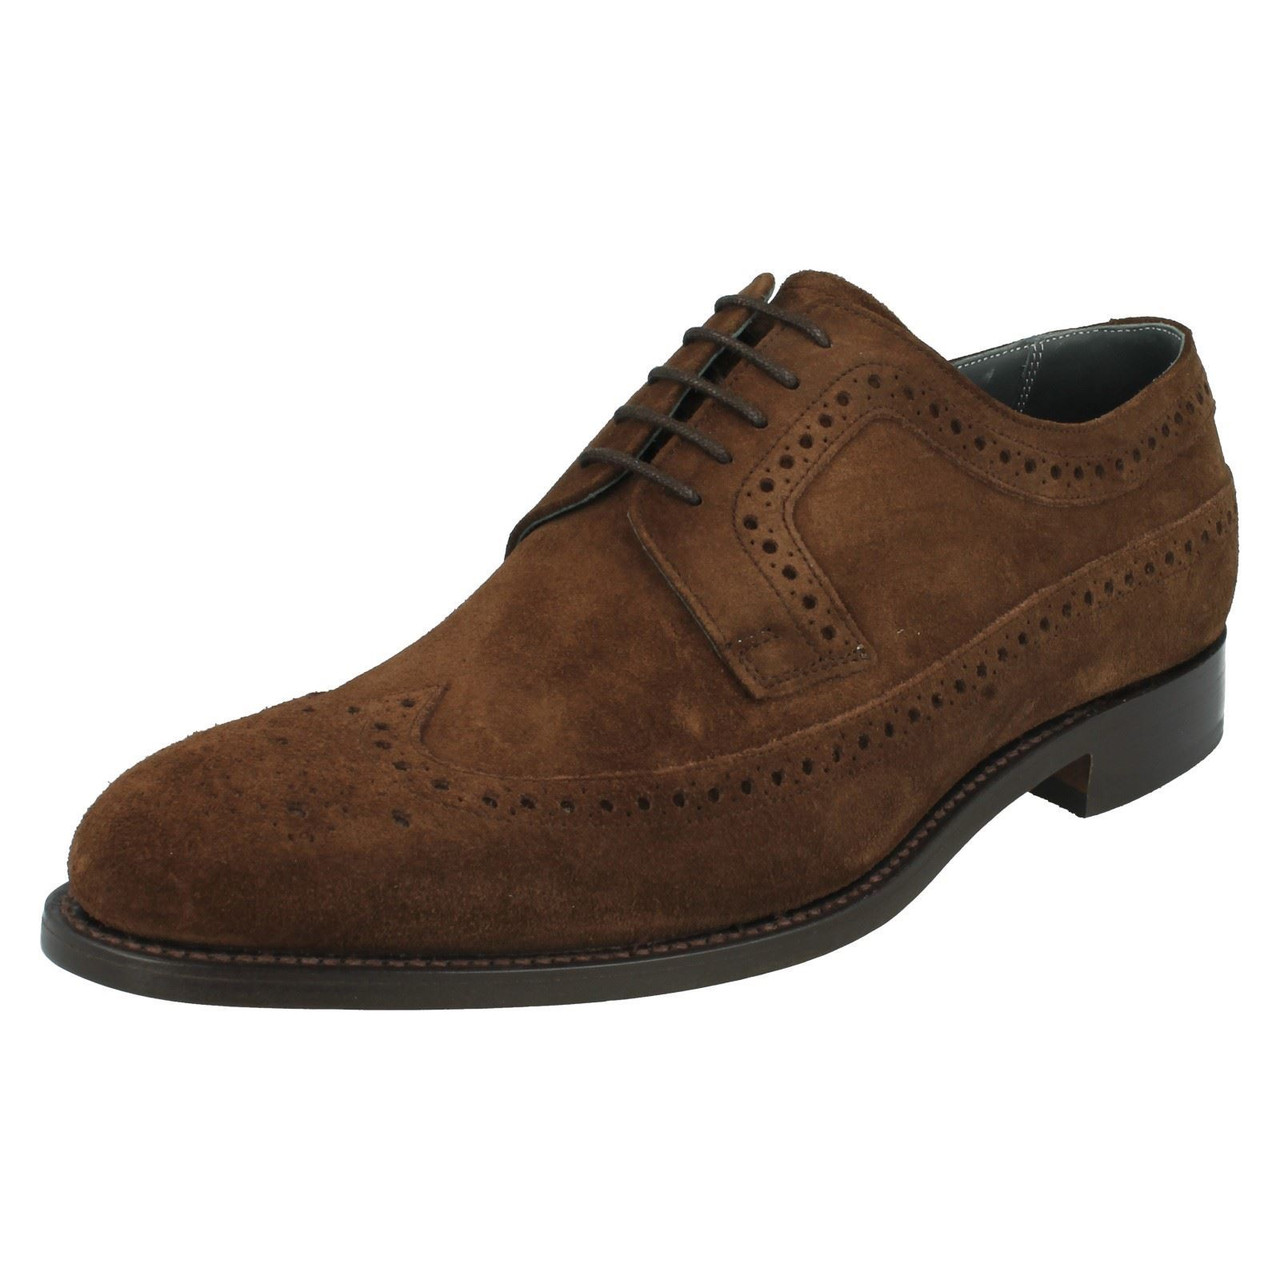 barker brown suede shoes